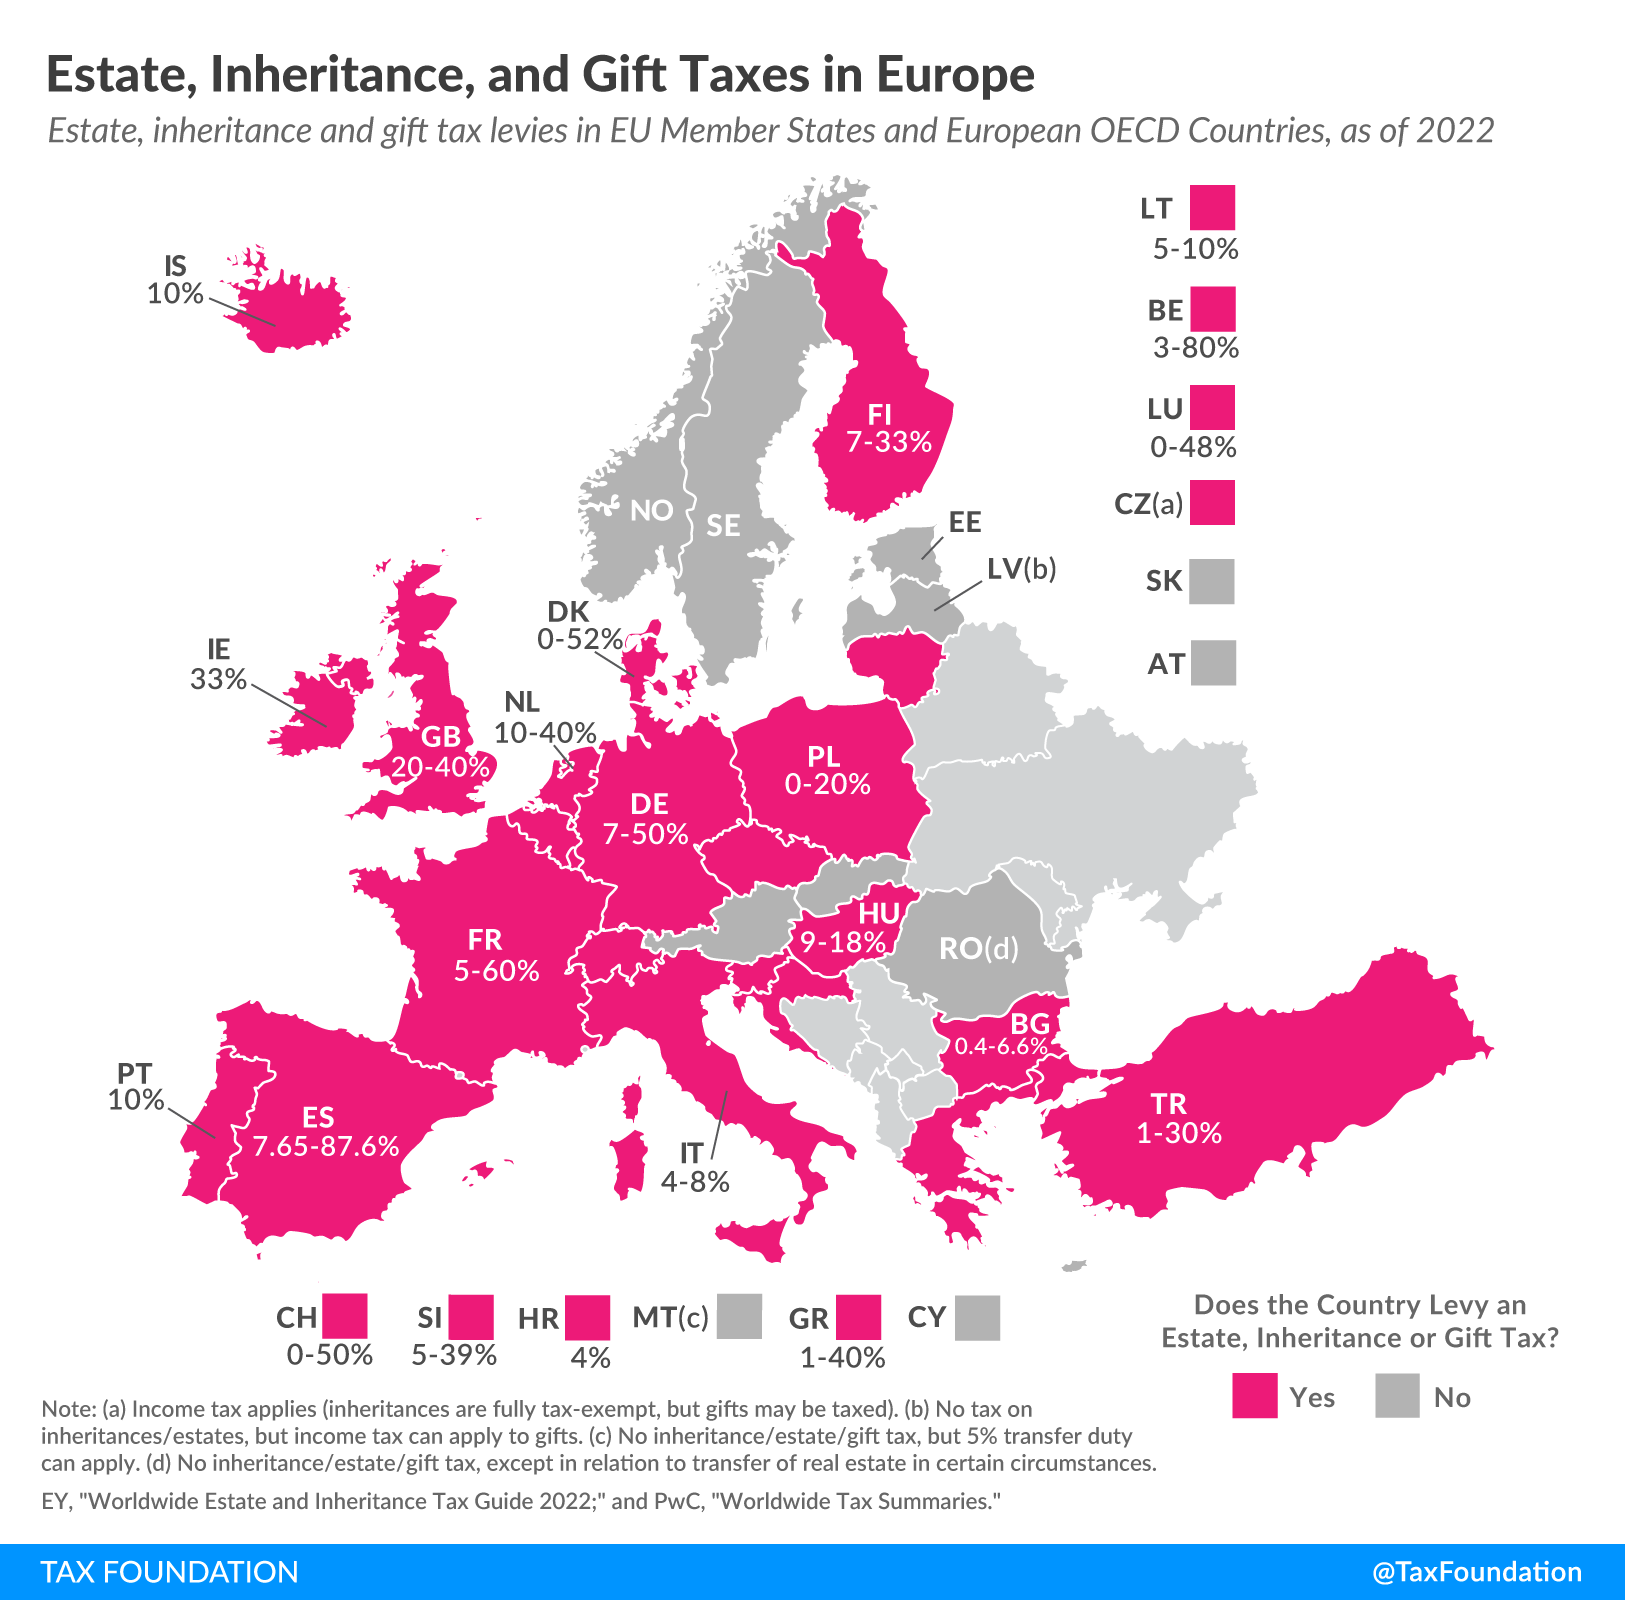 Estate taxes, inheritance taxes, and gift taxes in Europe 2023